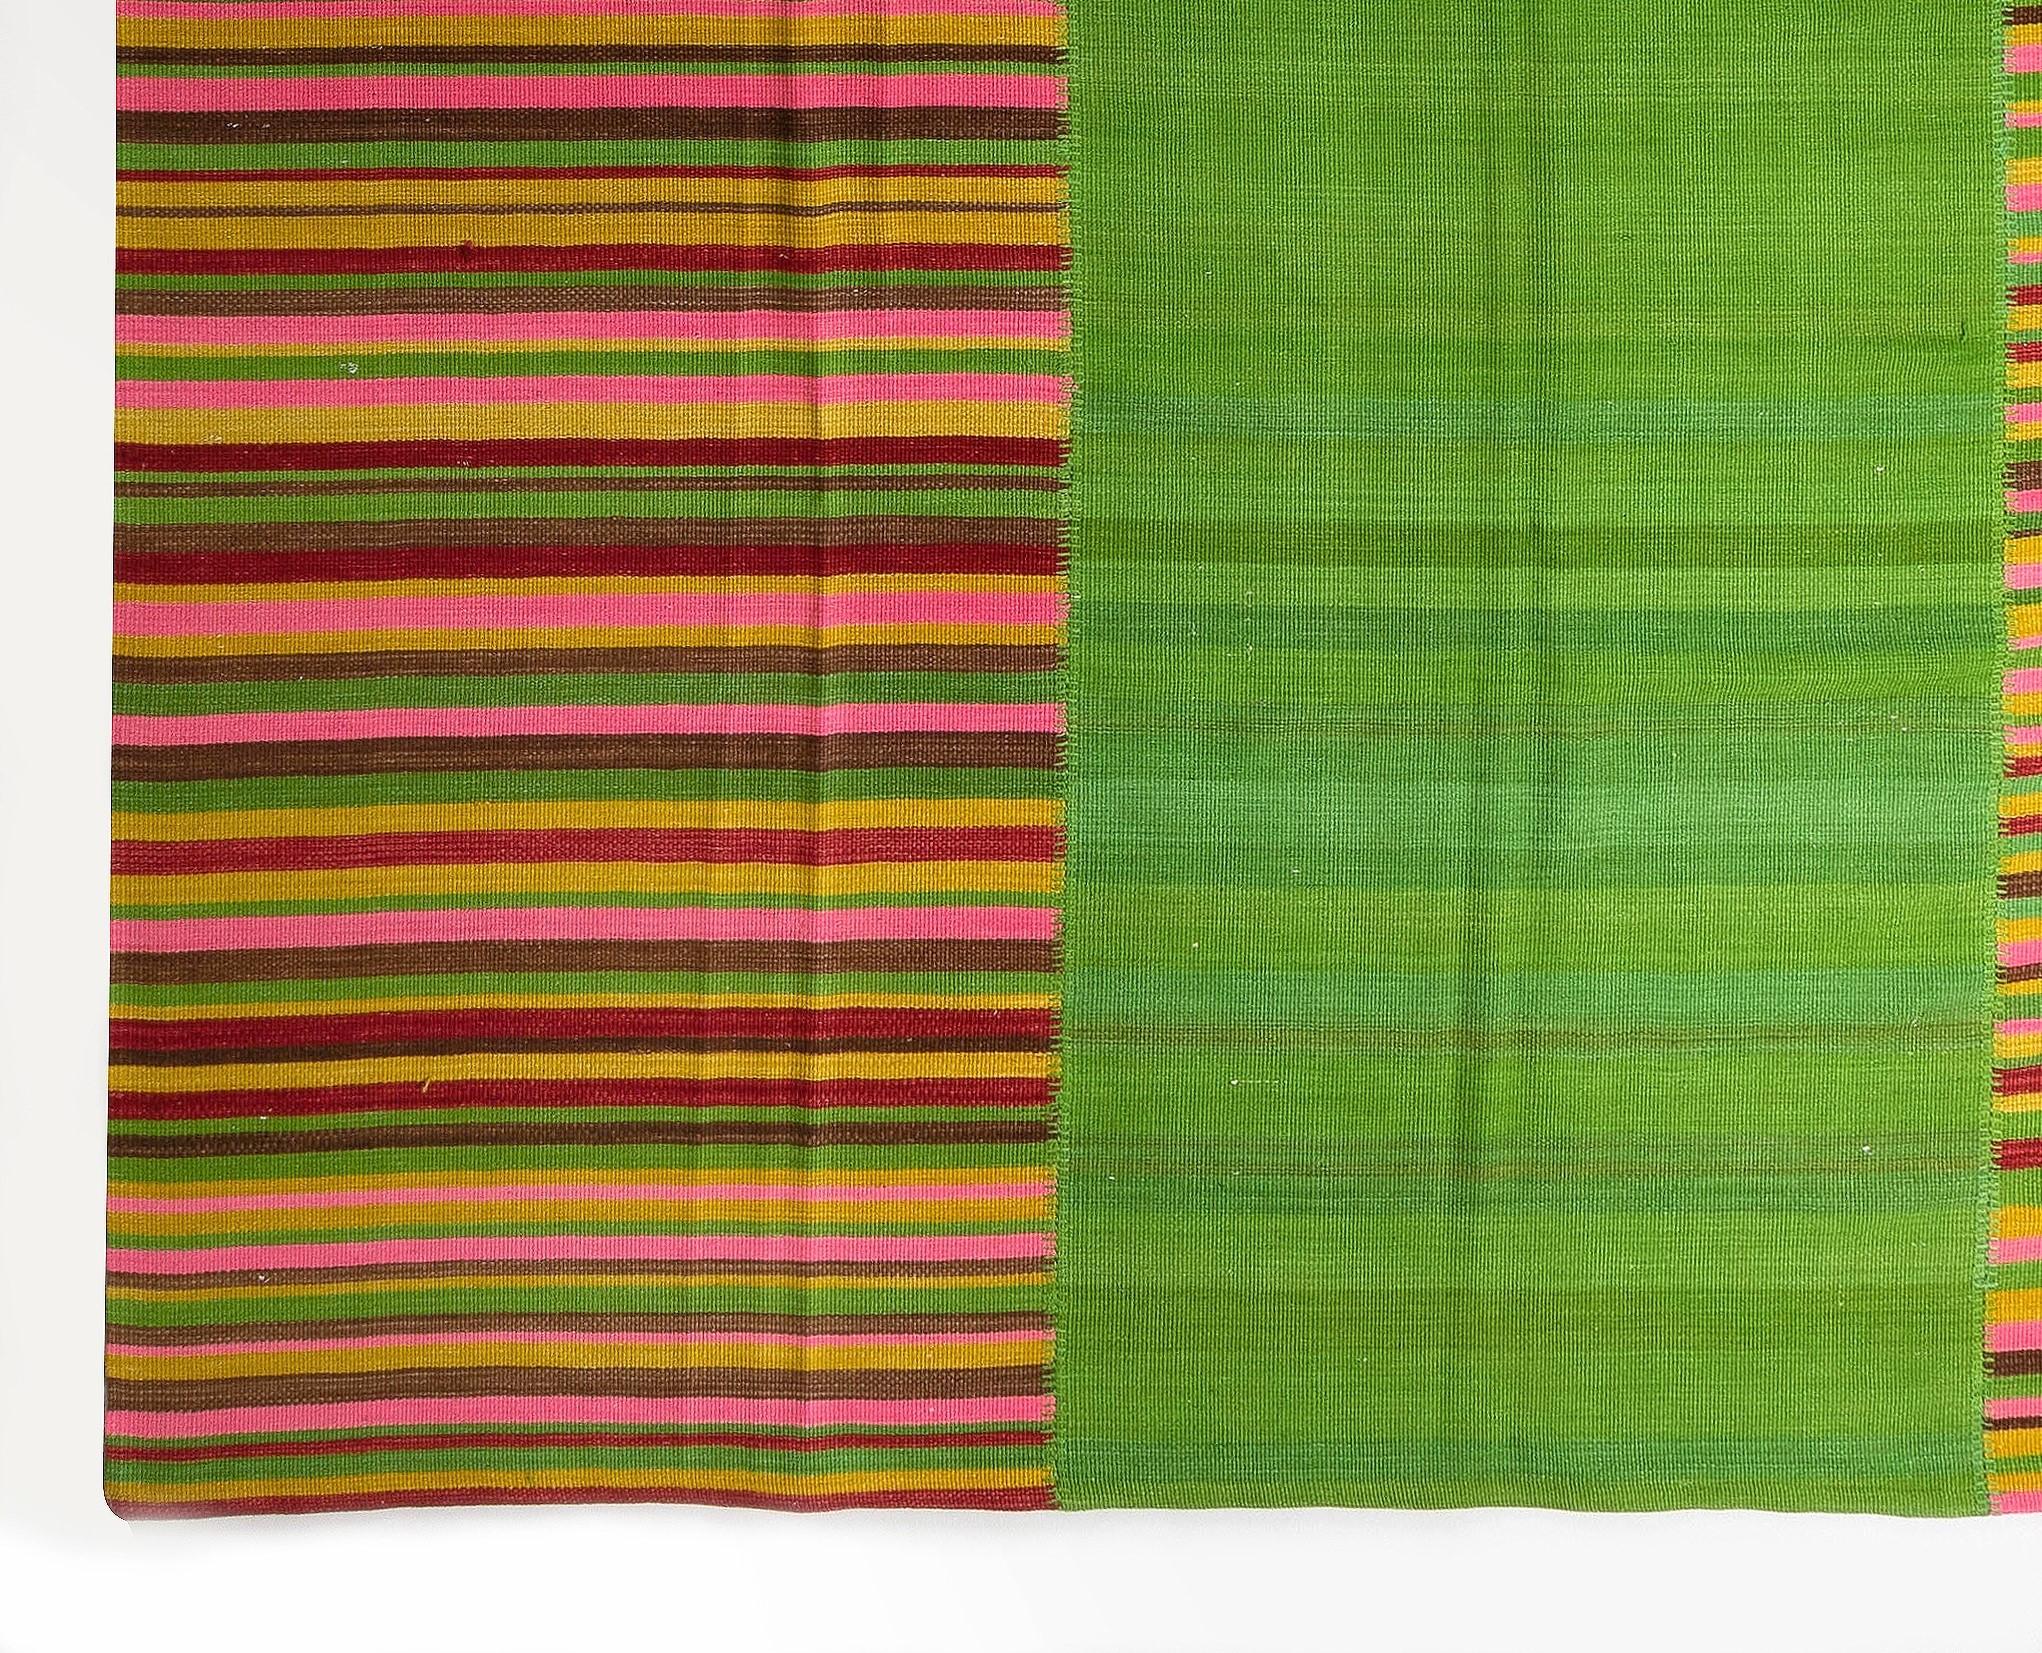 Hand-Woven 9.5x12 Ft Modern Green Double Sided Turkish Kilim Rug with Colorful Stripes For Sale